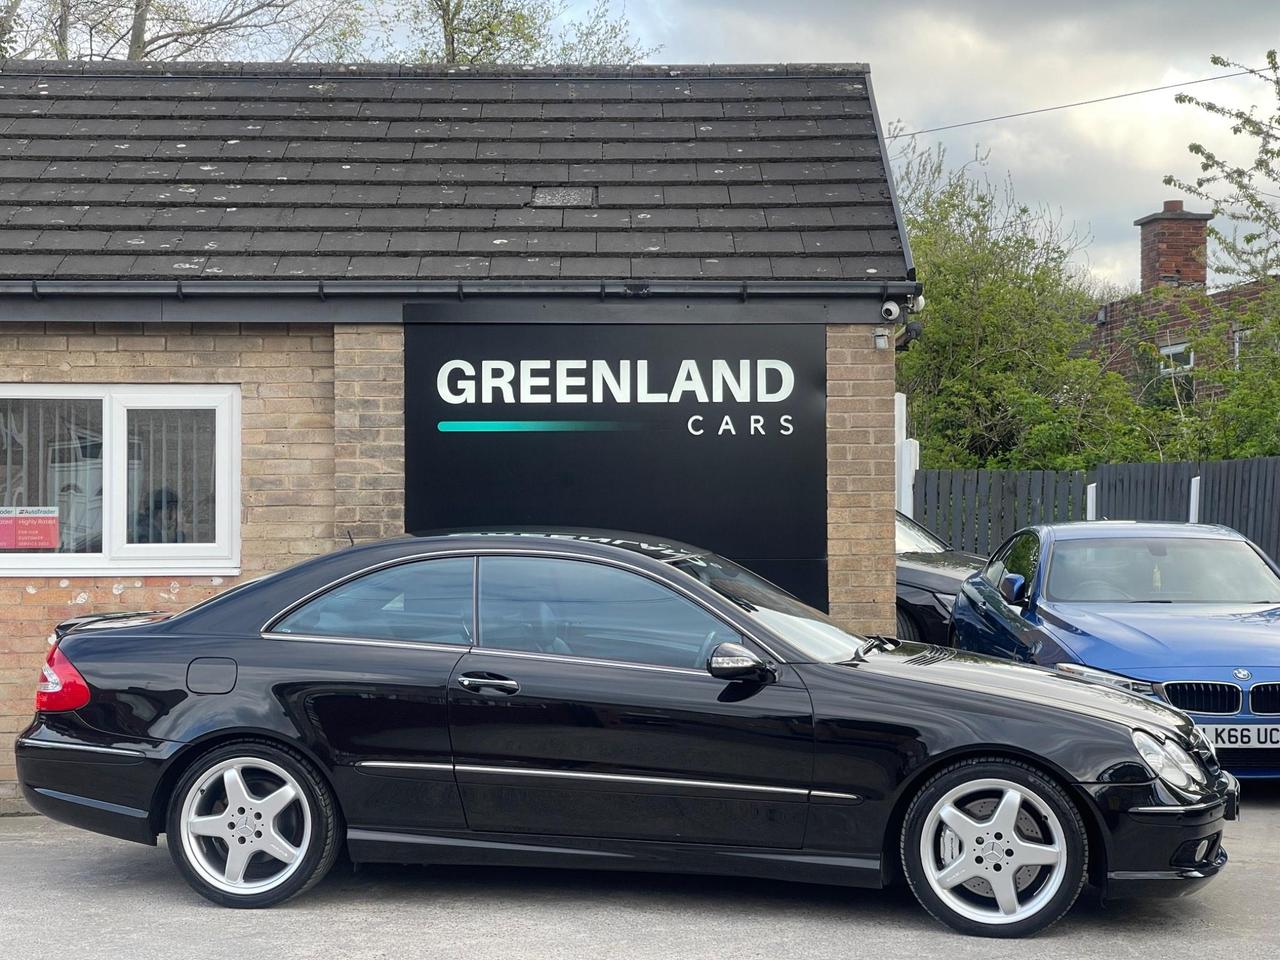 Used 2004 Mercedes-Benz CLK for sale in Sheffield